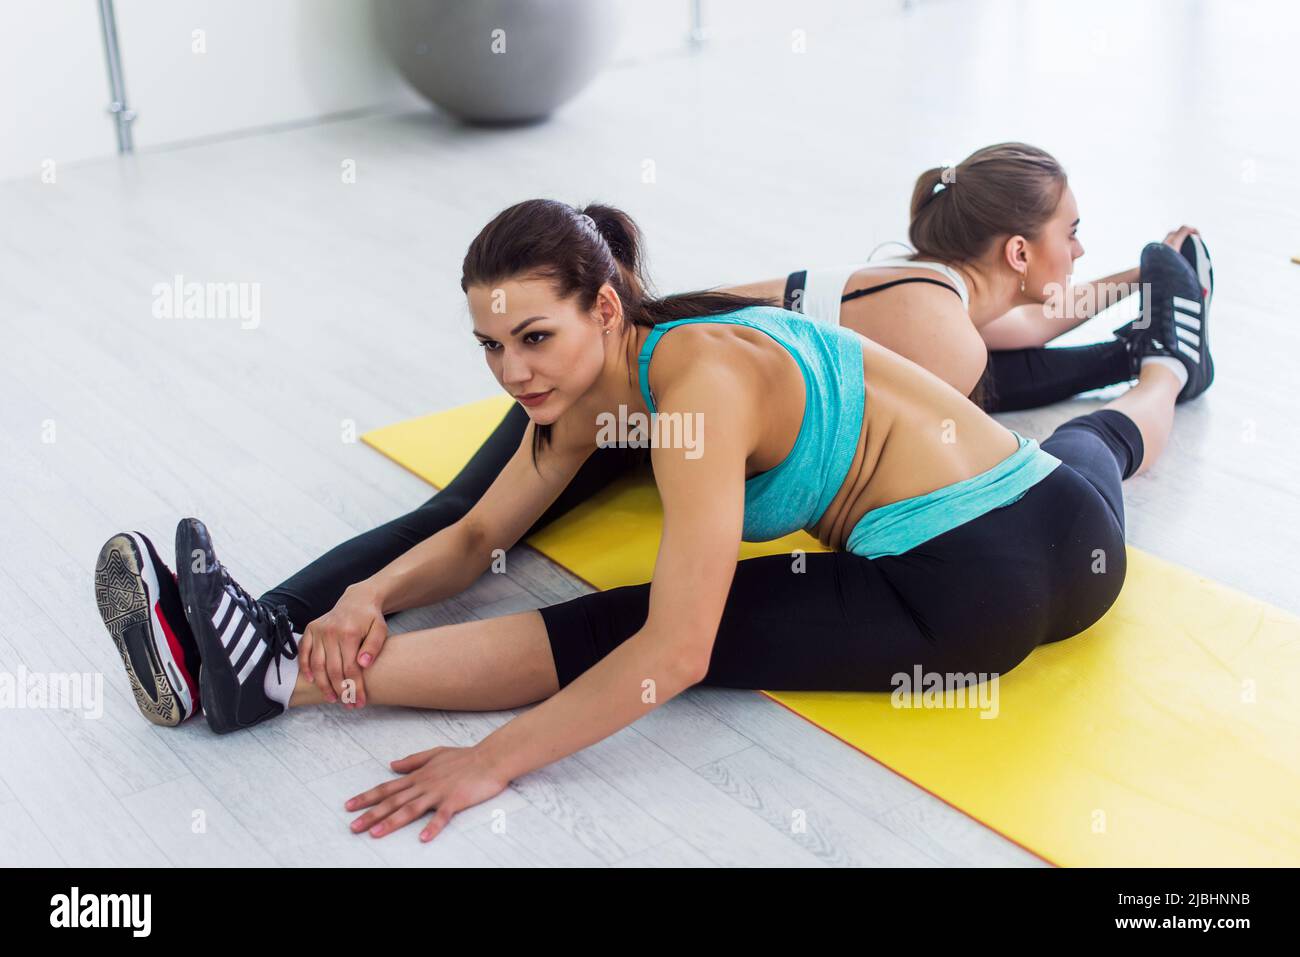 Two slim girls taking part in yoga class working in pair doing partner side seated wide angle pose called parsva upavistha konasana in sports center. Stock Photo